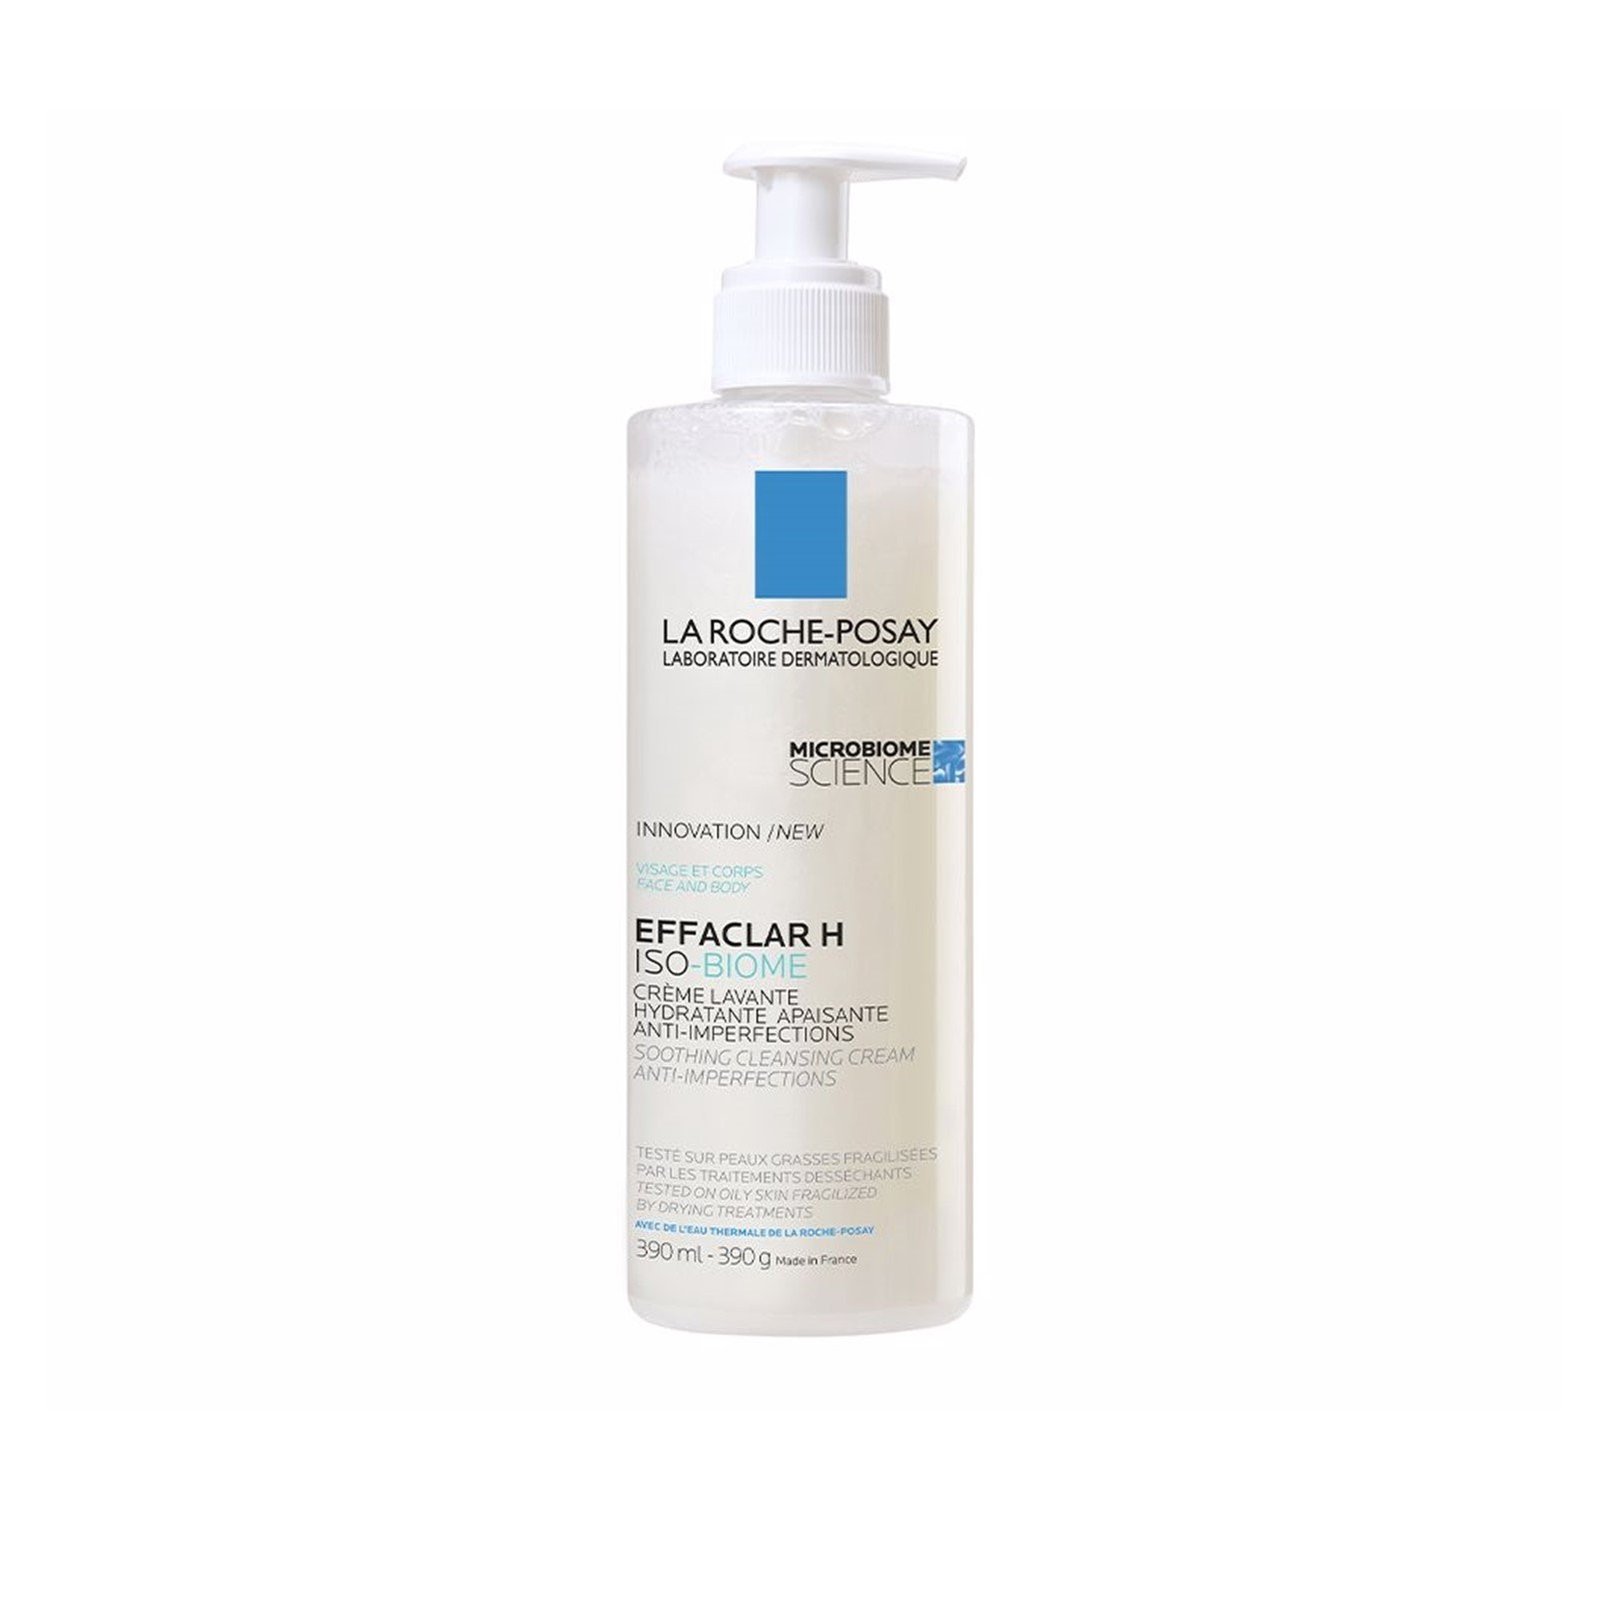 La Roche-Posay Effaclar H Iso-Biome Soothing Cleansing Cream 390ml